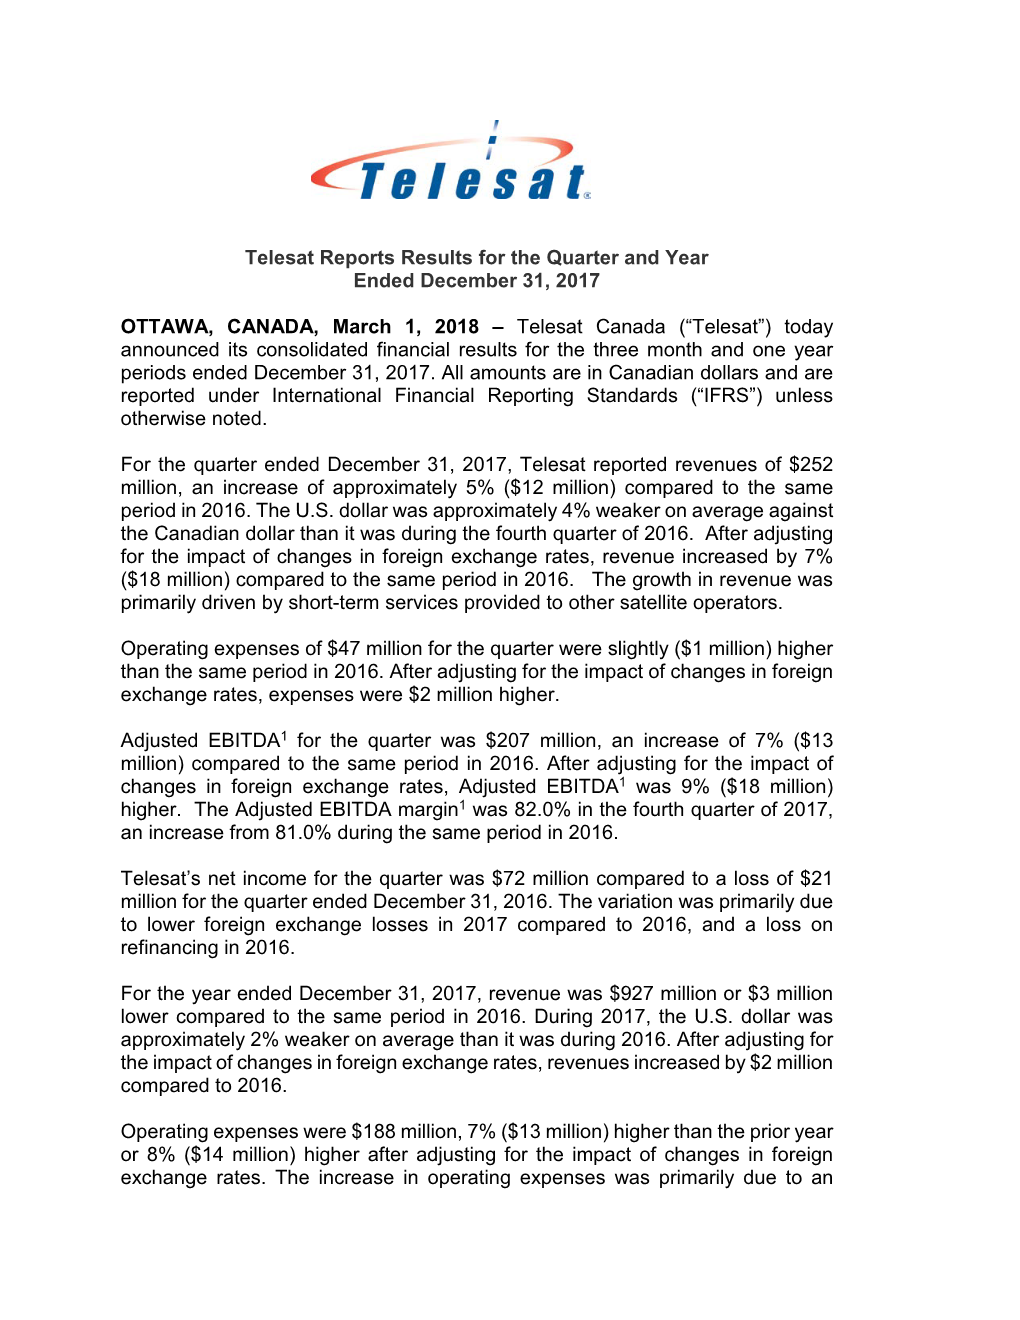 Telesat Canada (“Telesat”) Today Announced Its Consolidated Financial Results for the Three Month and One Year Periods Ended December 31, 2017